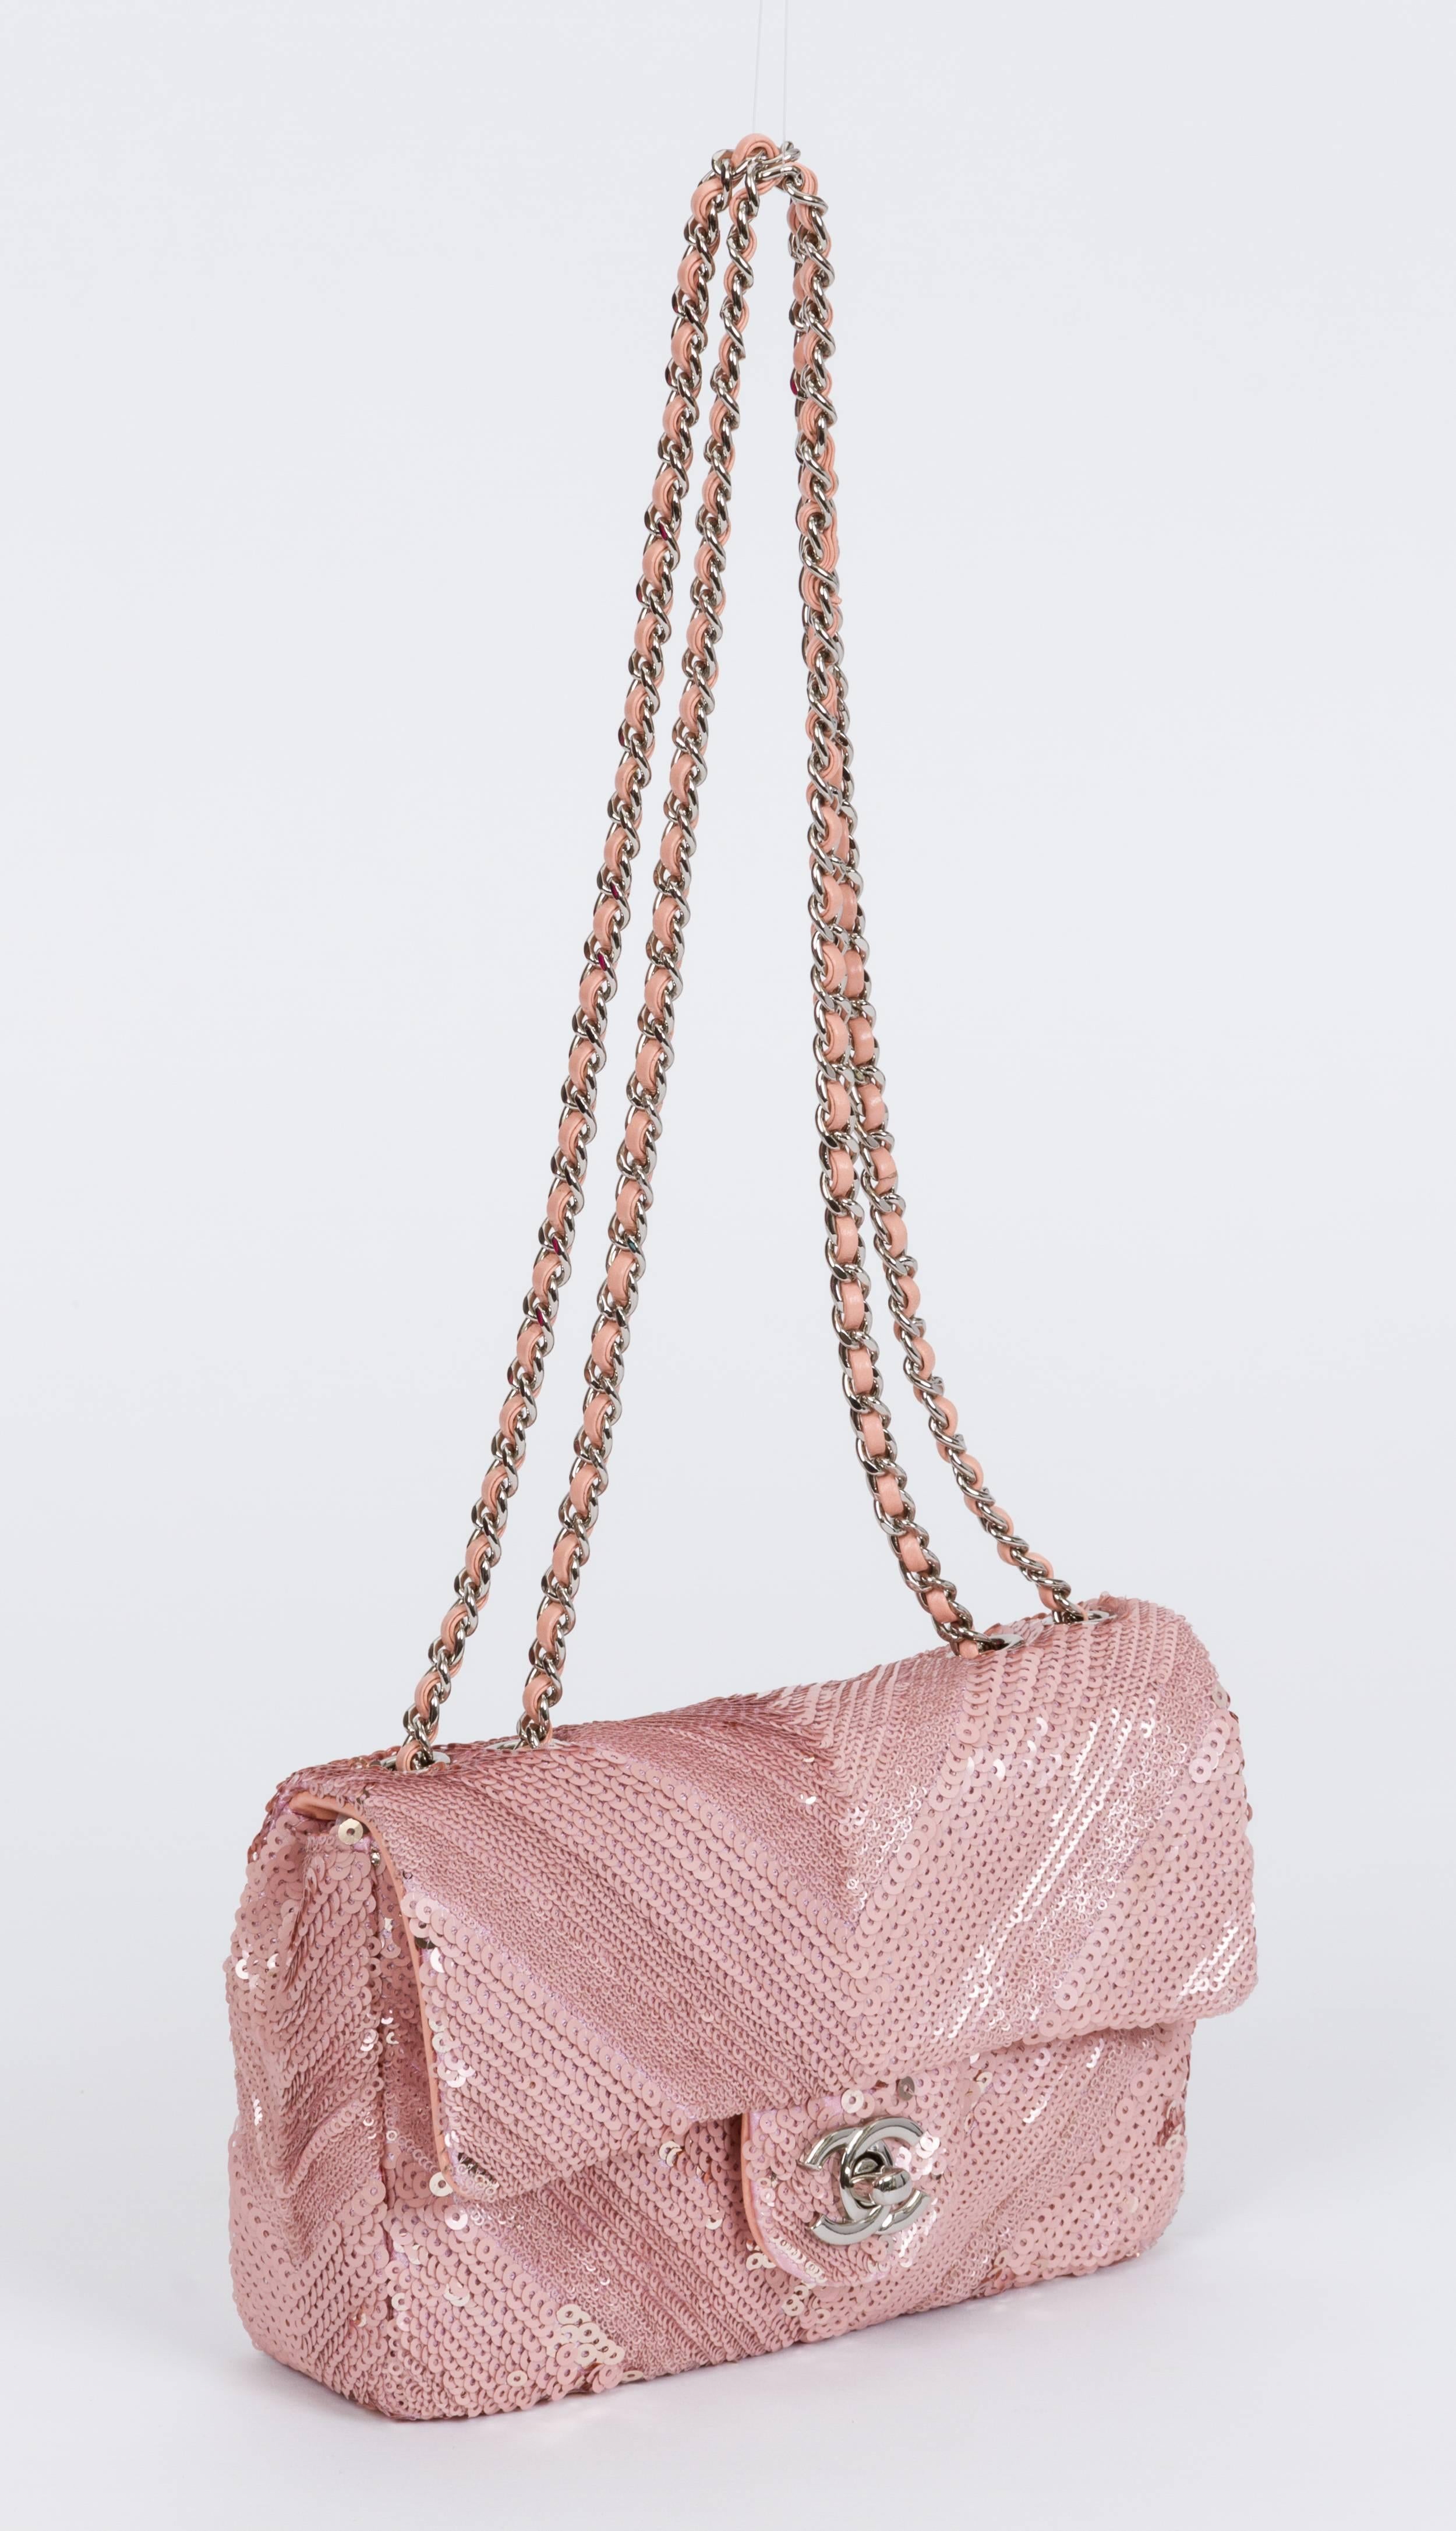 Chanel limited edition small single flap in pink sequins with silver metal chain. Soft pink lambskin interior. Can be worn also cross body. Shoulder drop 12